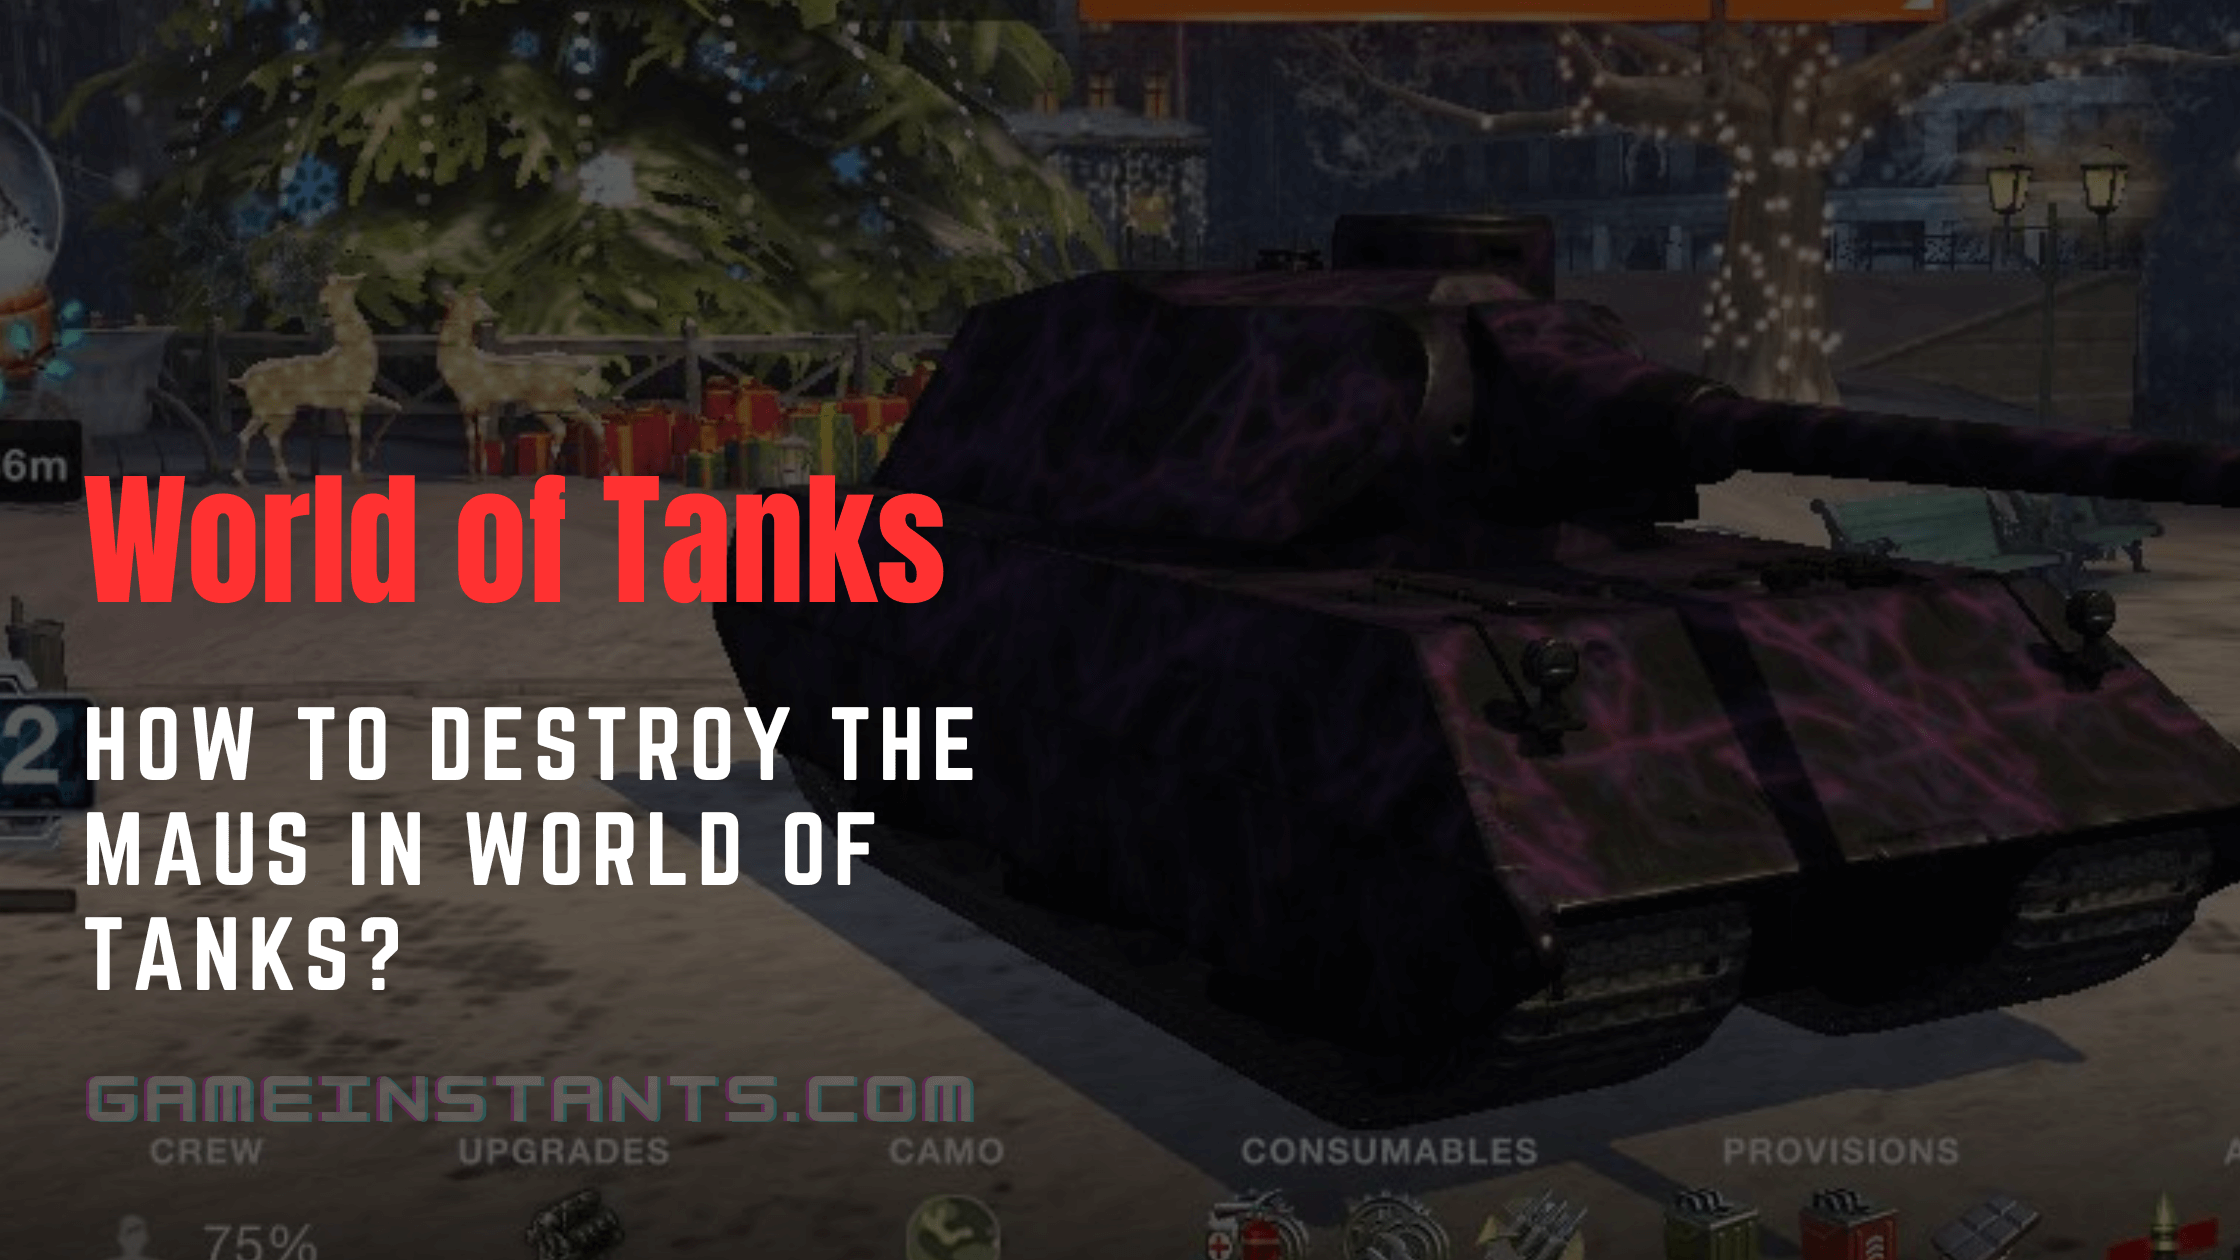 Destroy the Maus in World of Tanks